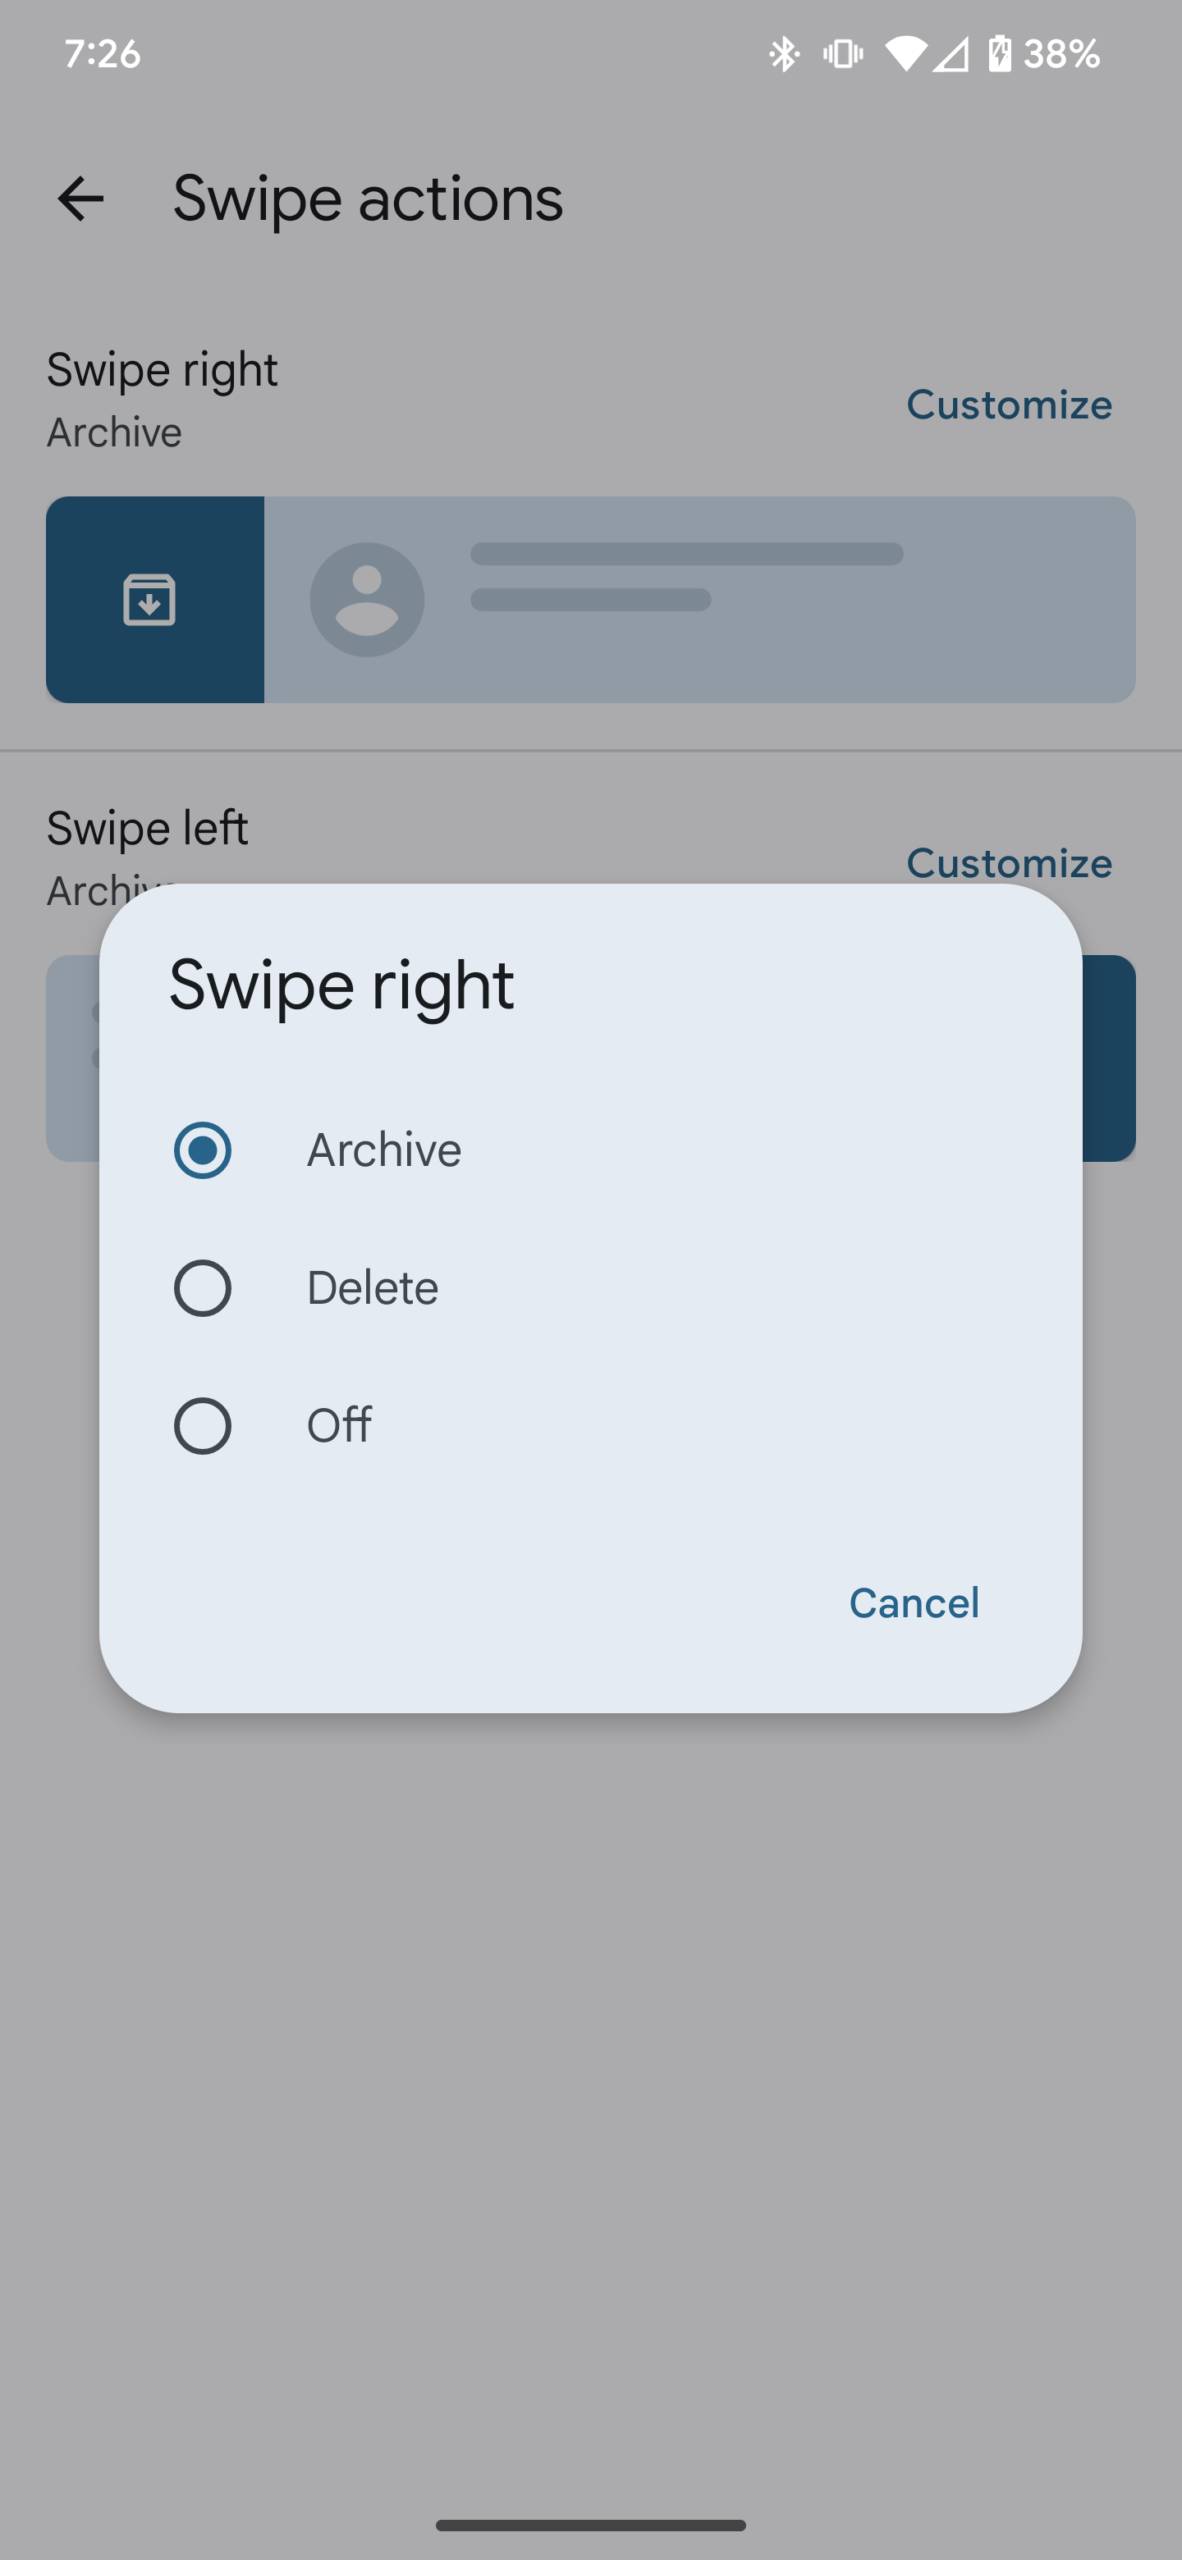 google-messages-swipe-actions-2-1-scaled.webp